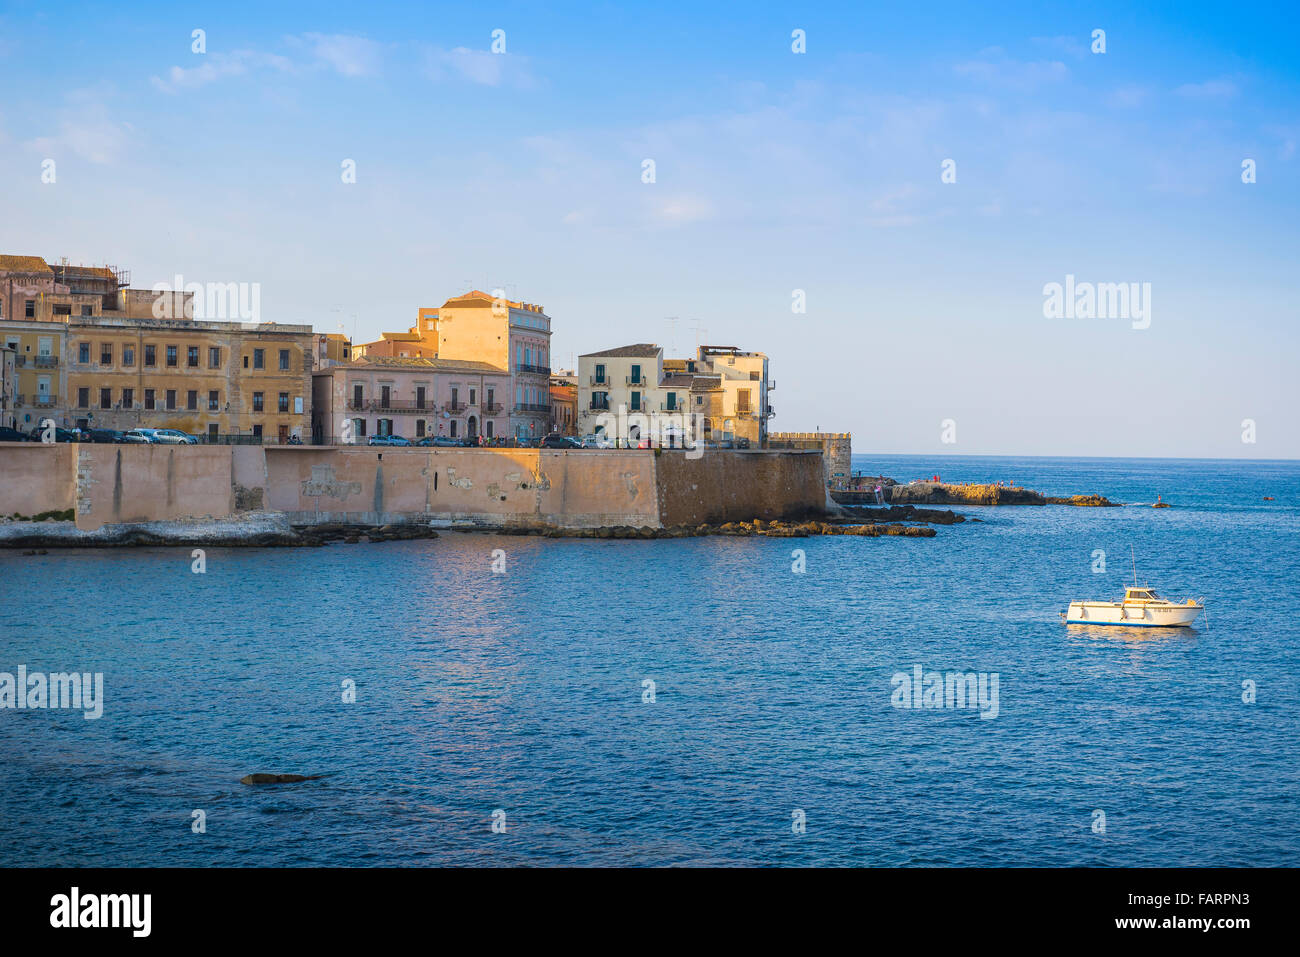 Syracuse Sicily harbor harbour, view at sunset of a small leisure boat on the eastern side of Ortigia Island, Syracuse,Sicily. Stock Photo